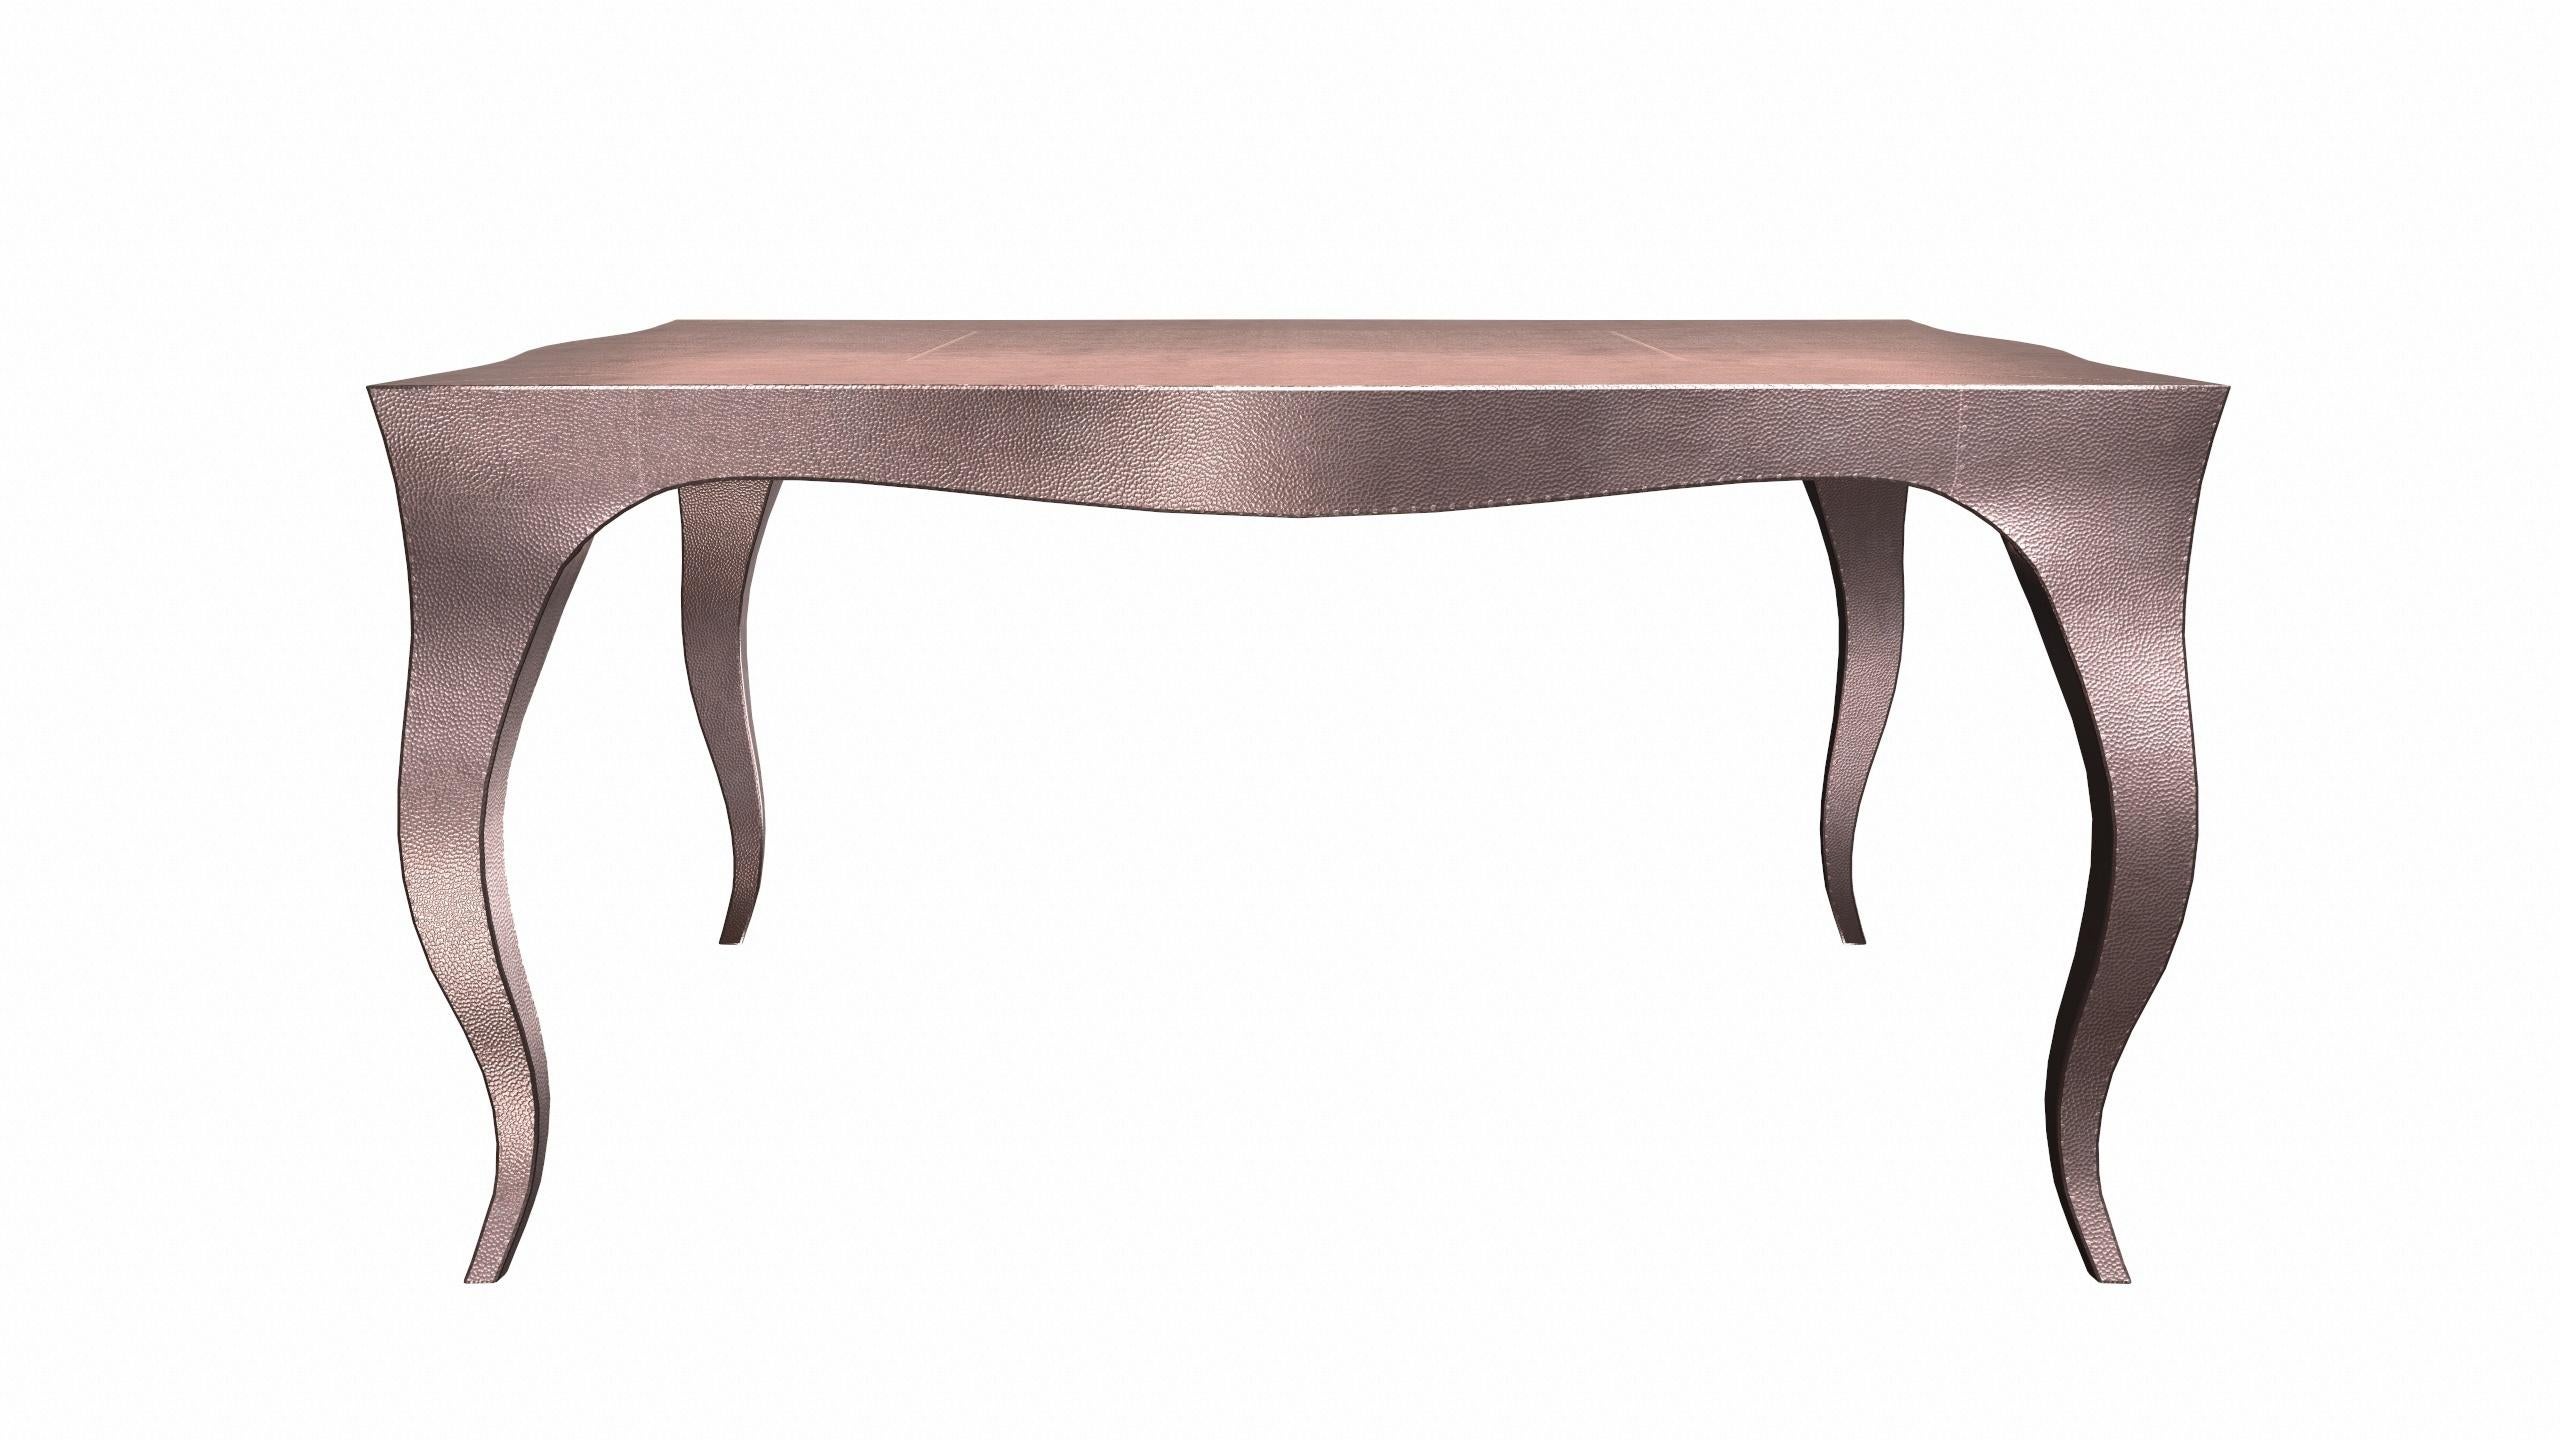 American Louise Art Deco Industrial Table Mid. Hammered Copper 18.5x18.5x10 inch  For Sale